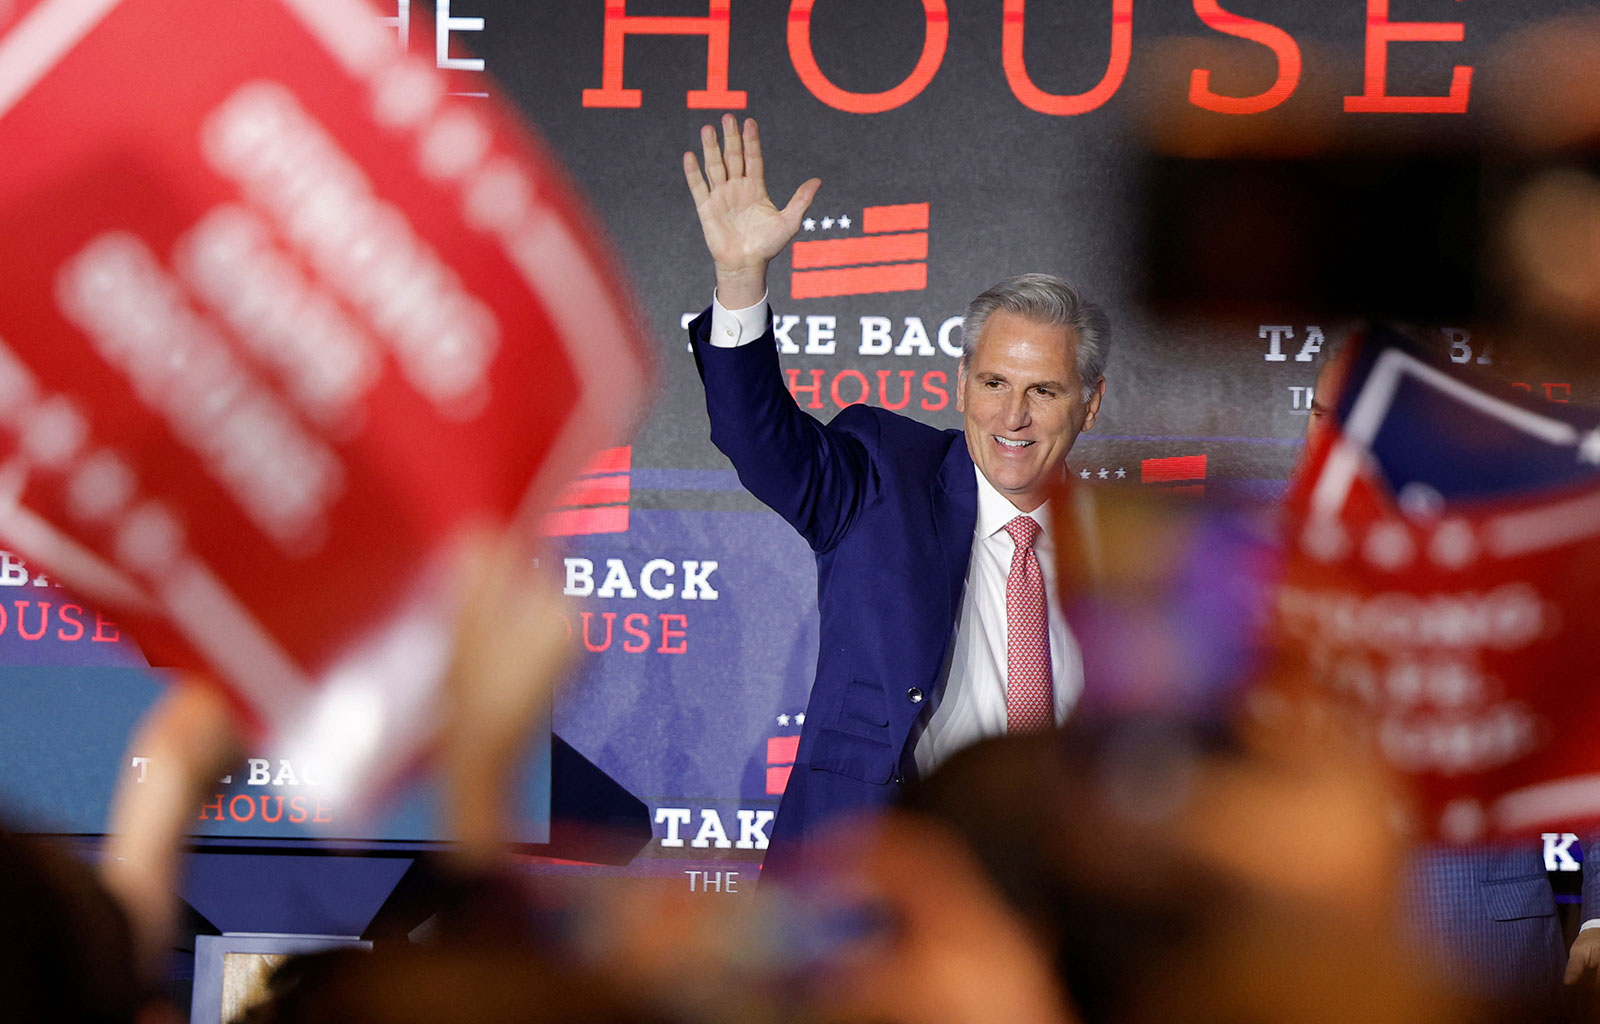 Kevin McCarthy waves to the crowd after speaking at a House Republicans election night party on November 9. 